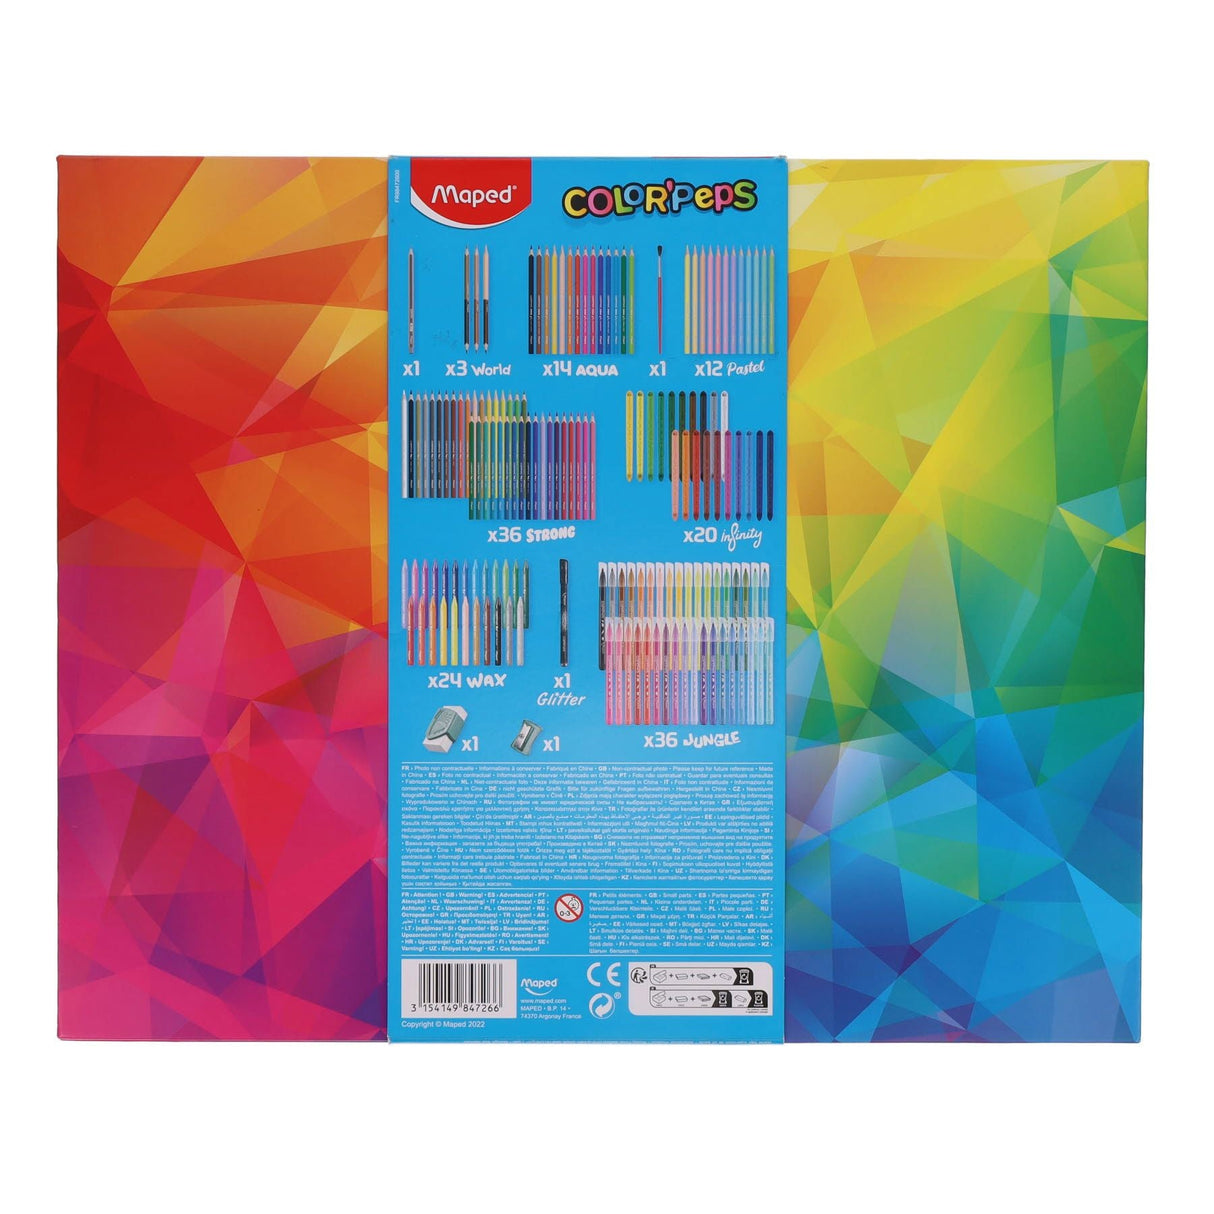 Maped Colorpeps Set - 150 Pieces | Stationery Shop UK